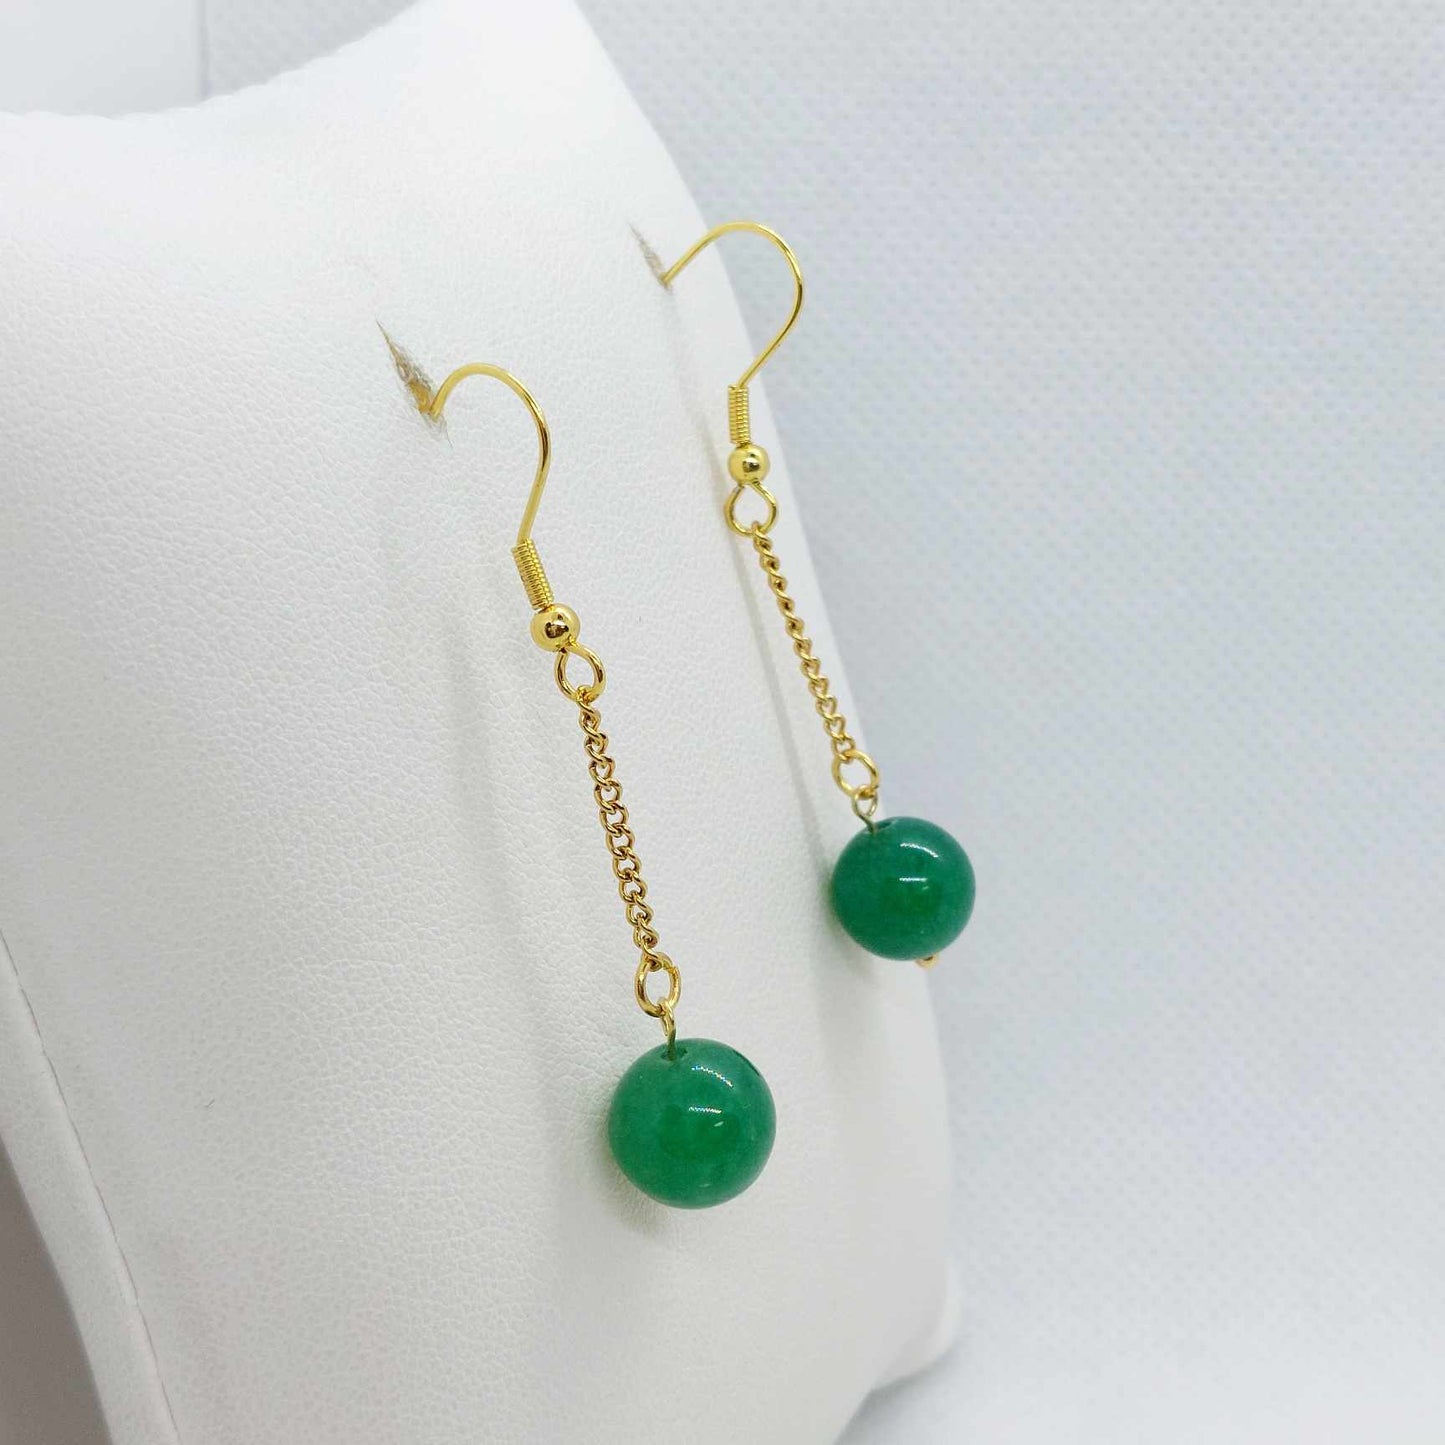 Natural Jade Dangle Earrings in Gold Plated Stainless Steel